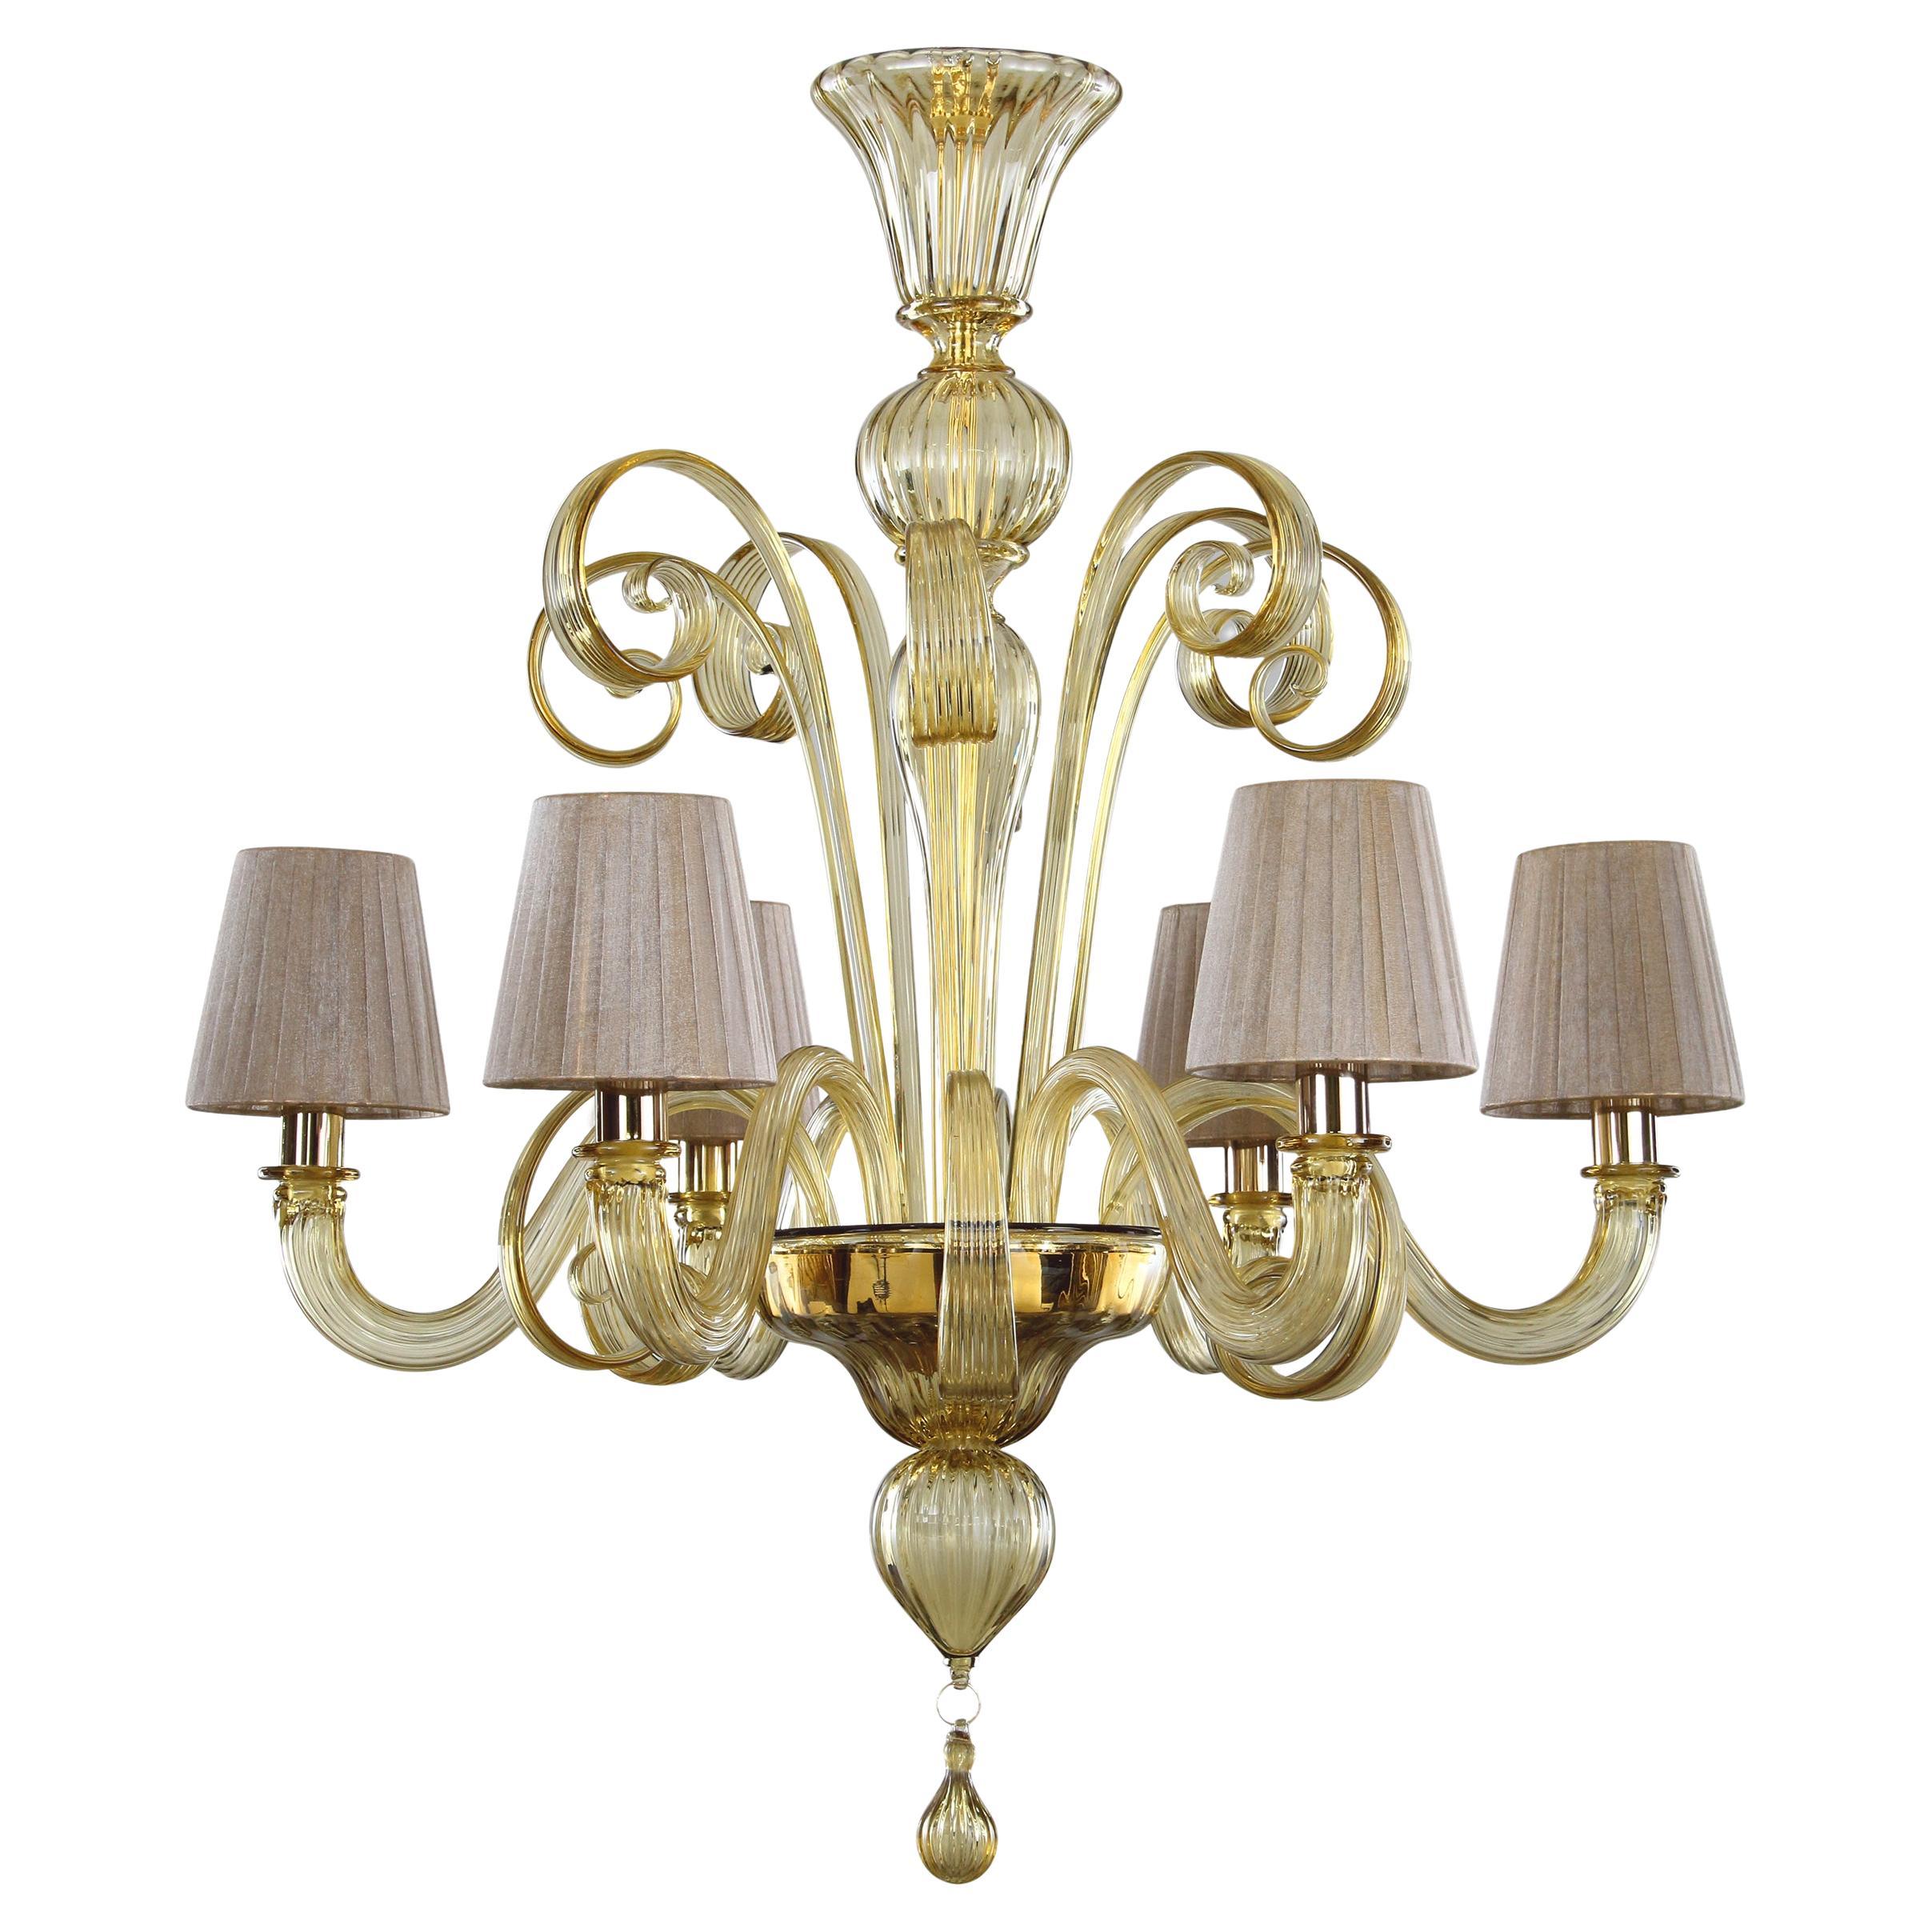 Artistic Chandelier 6 Arms Straw Leaf Murano Glass and Lampshades by Multiforme